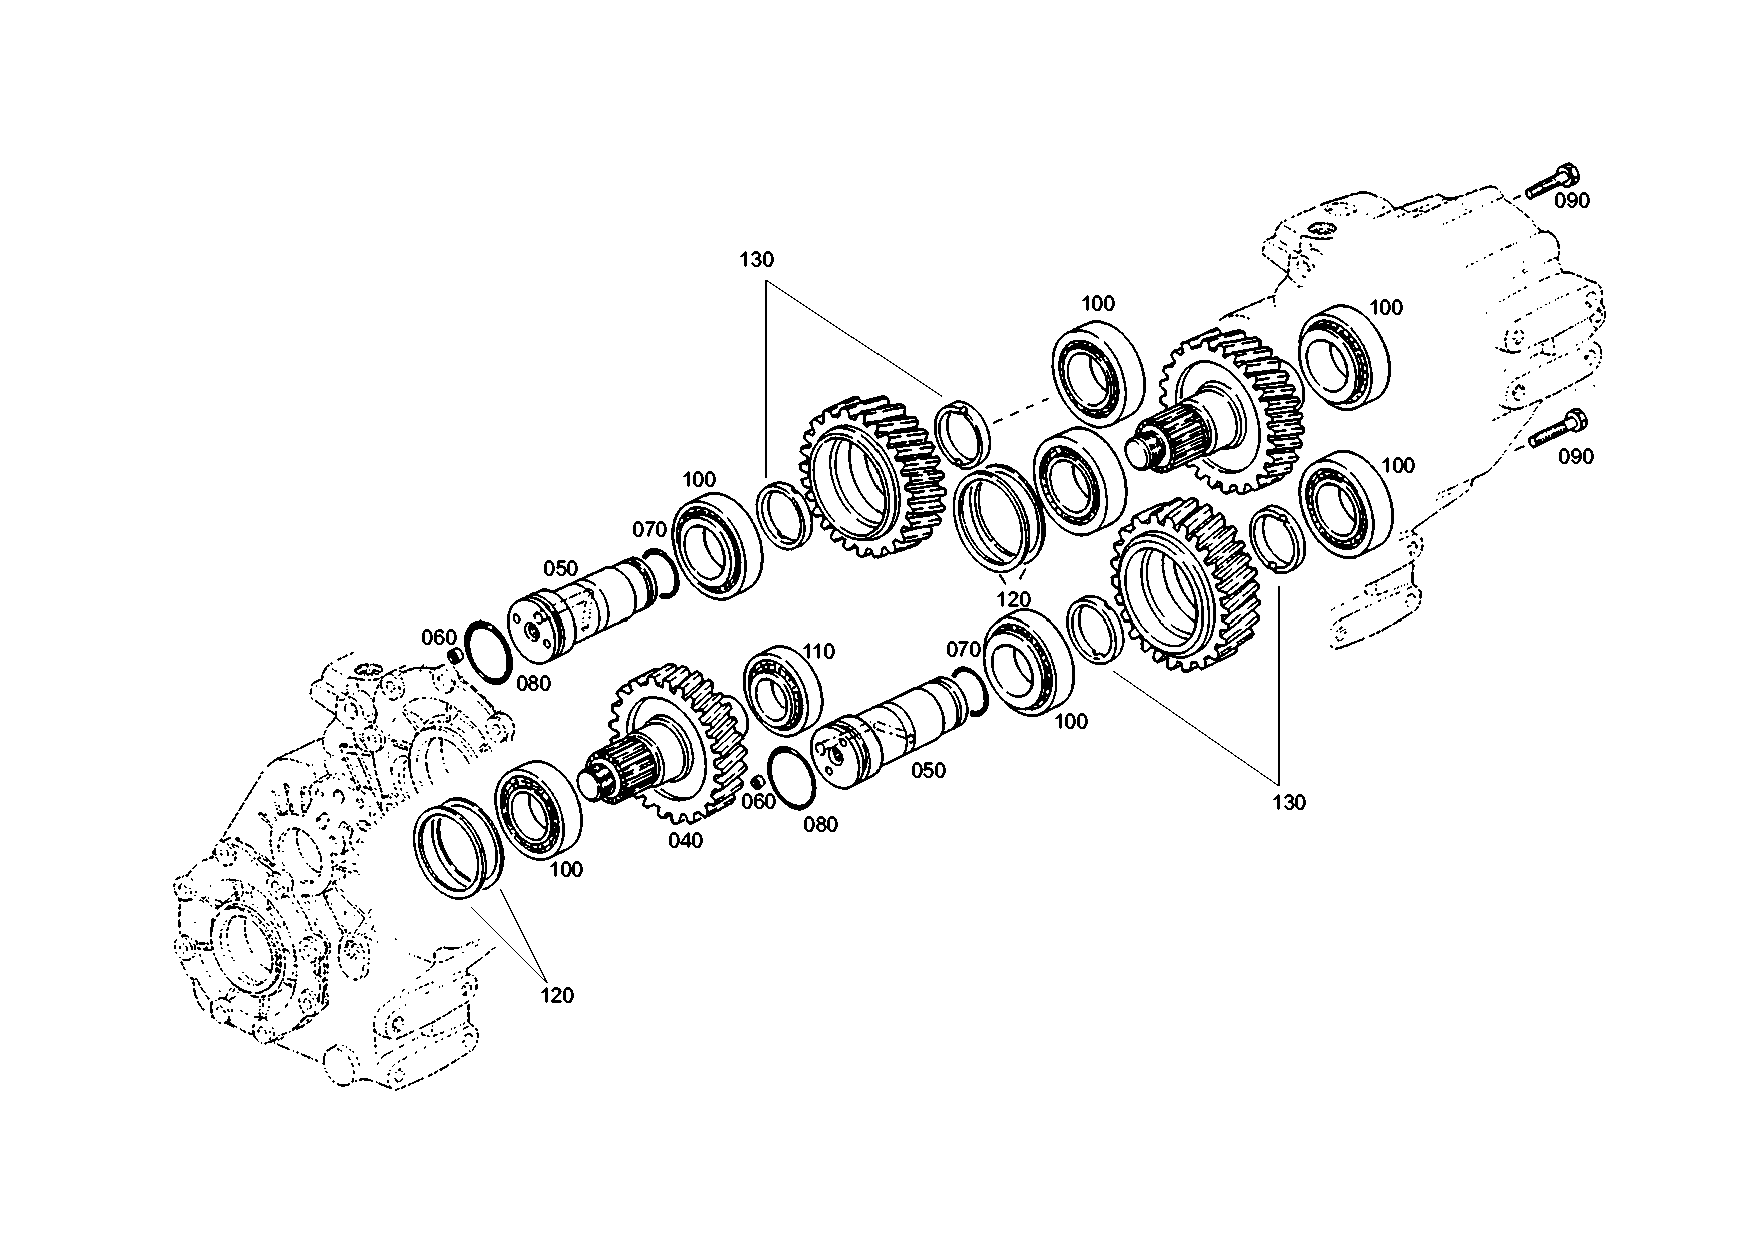 drawing for MAGNA STEYR 170500220017 - IDLER GEAR (figure 1)